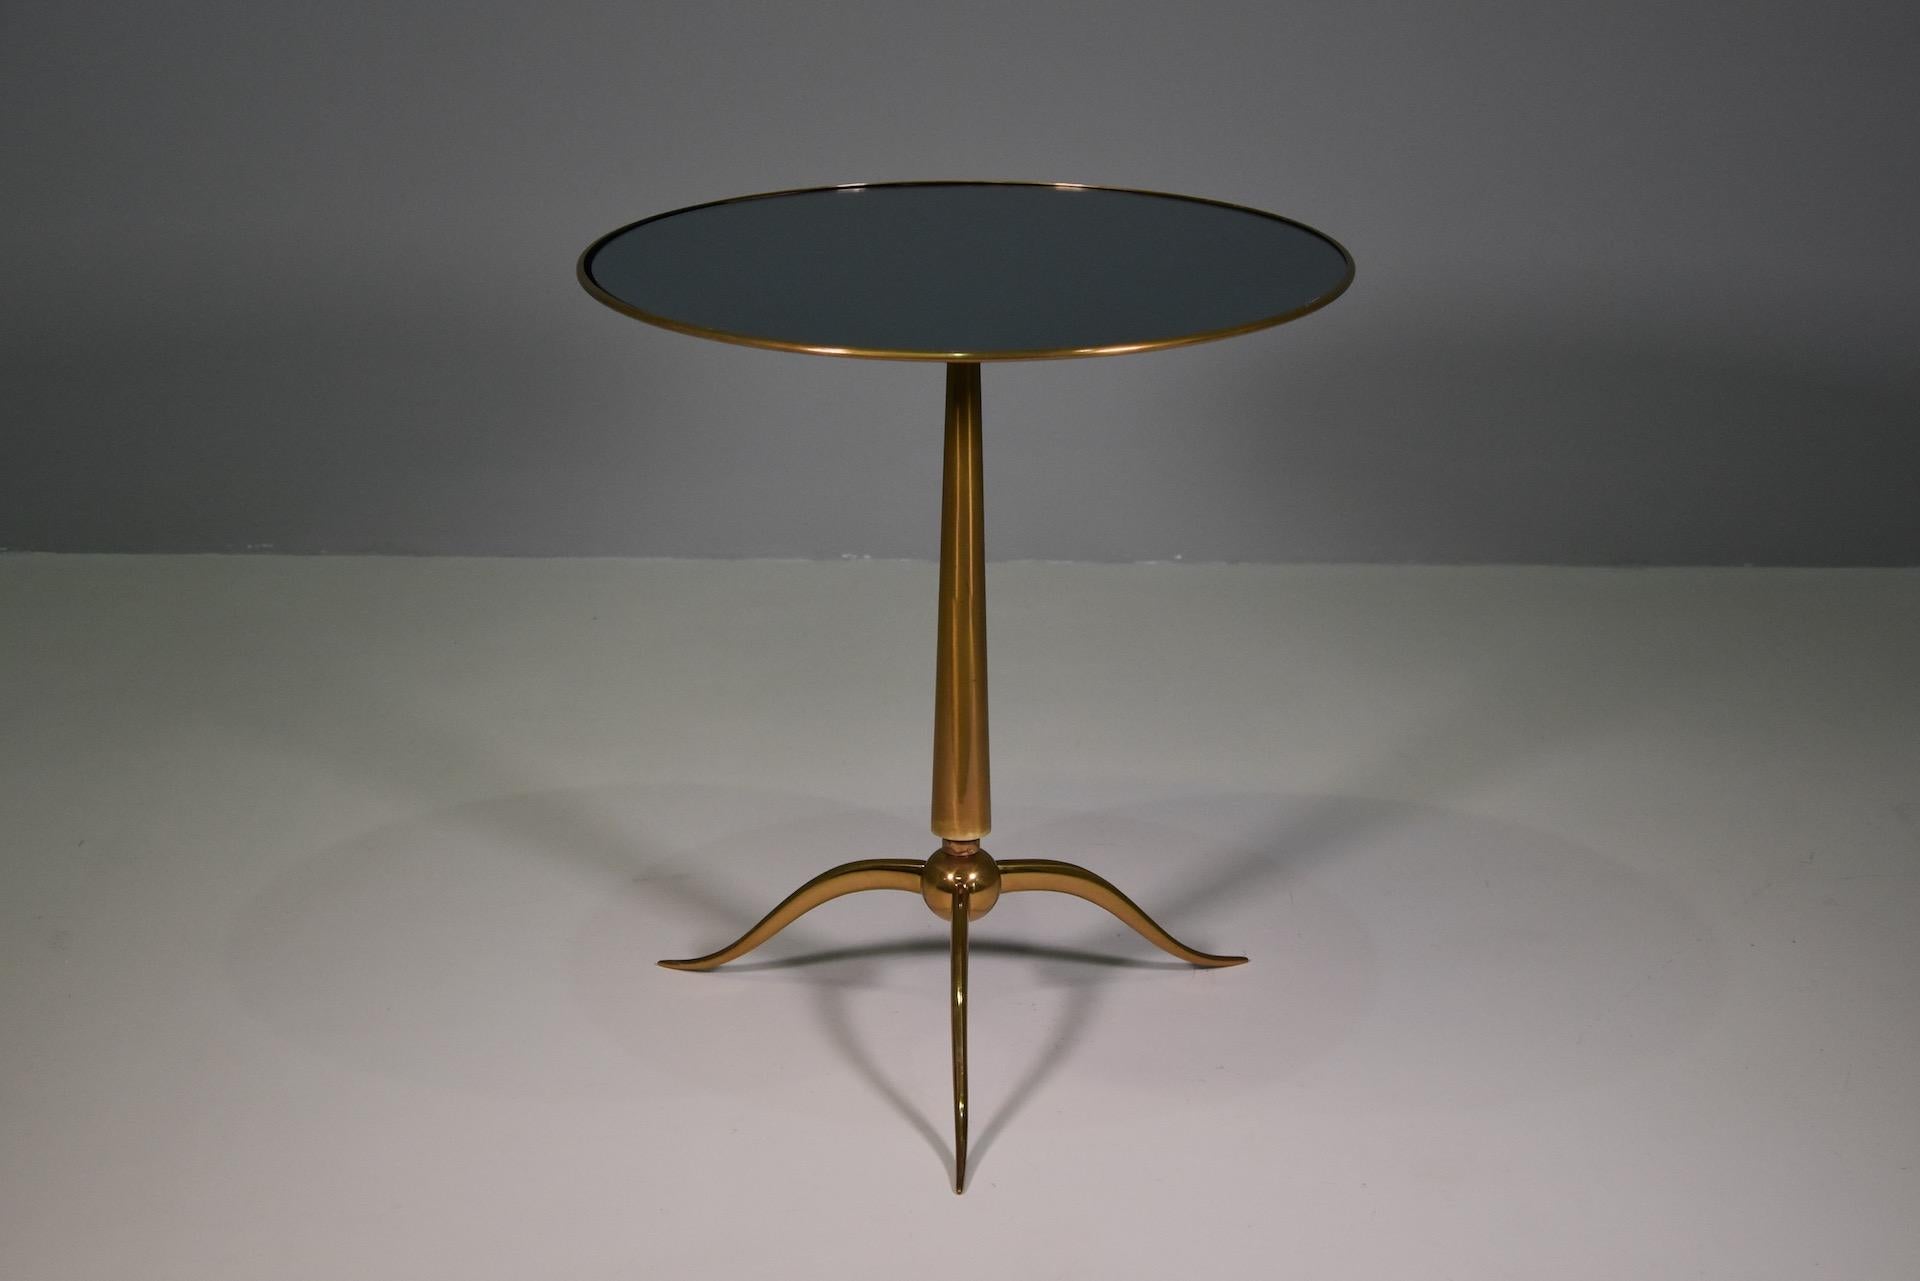 Rareof stunning round side tables with brass top and inset beveled blue glass on elegant brass tripod base, designed by Osvaldo Borsani and manufactured by Arredamenti Borsani Varedo, Milan, 1950s. 
Beautifully elegant lines and proportions in a